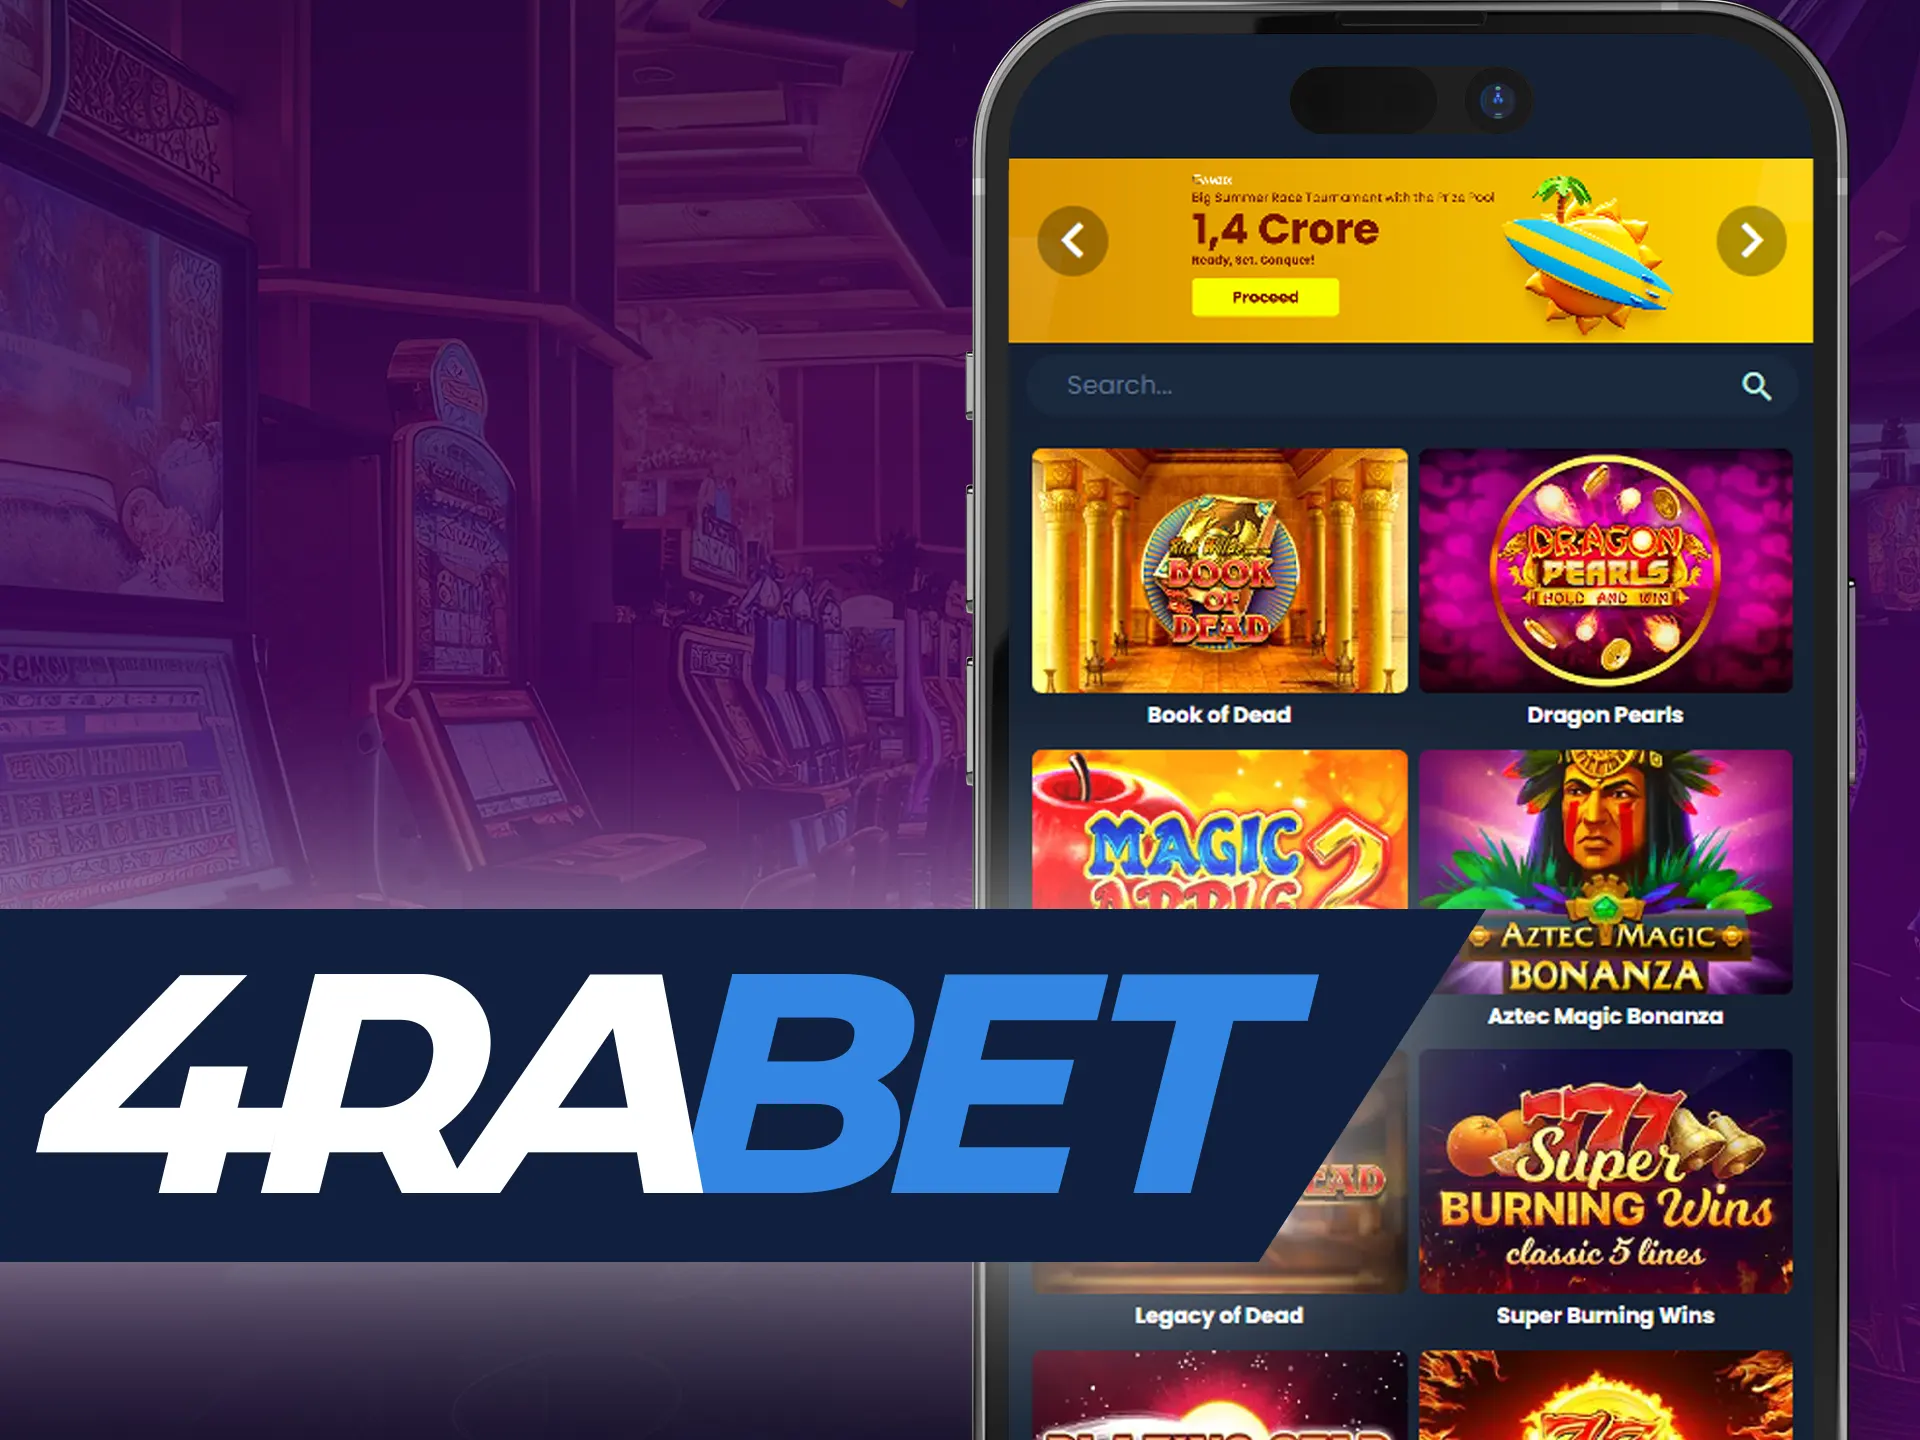 With 4rabet app, dive into the world of the best slot machines.